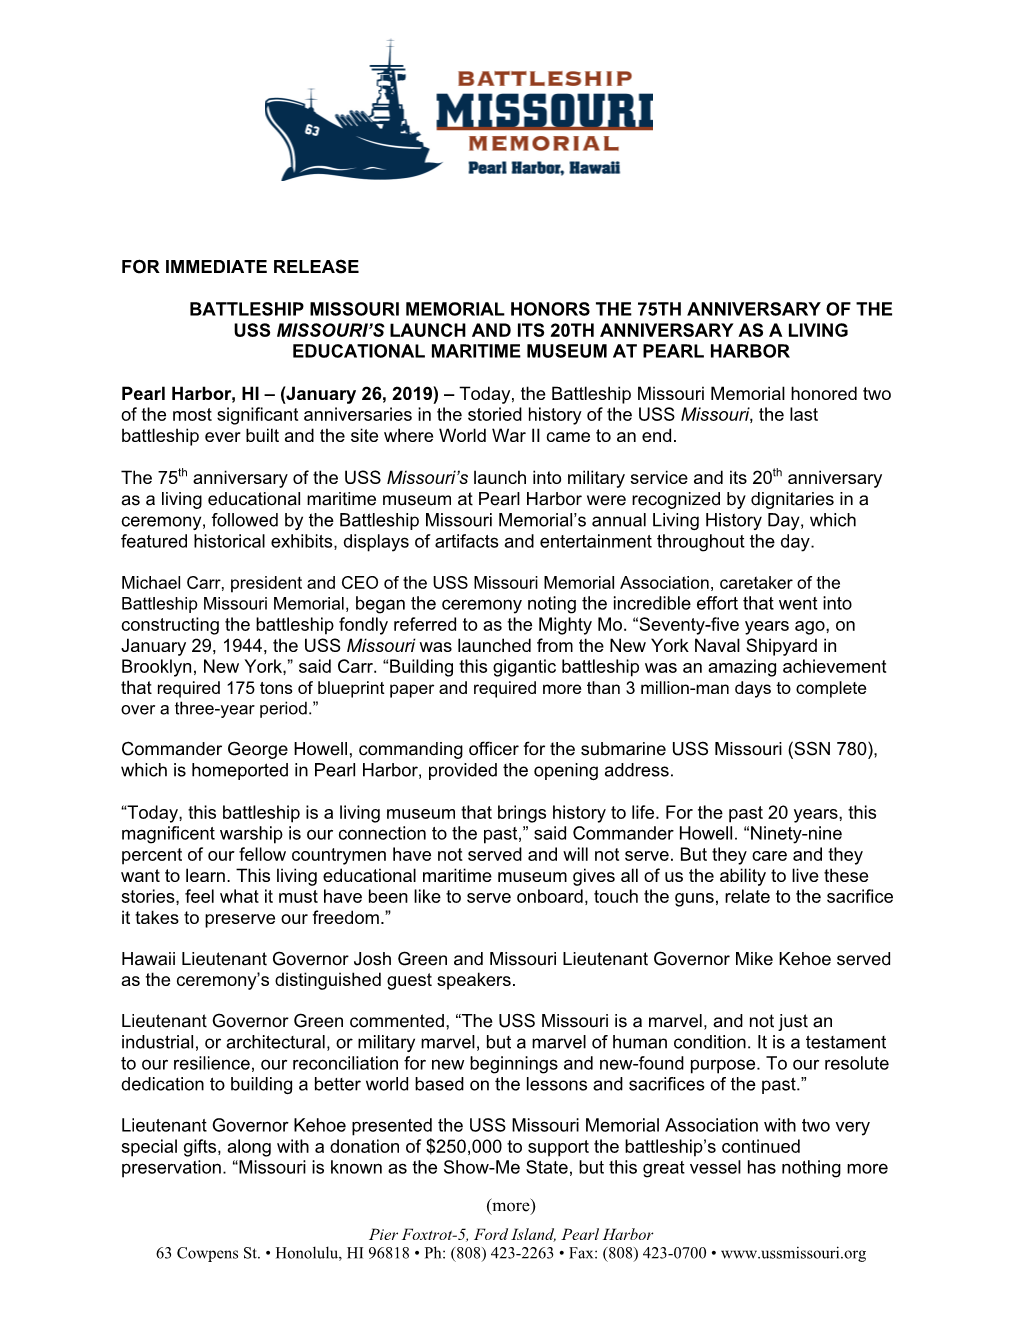 (More) for IMMEDIATE RELEASE BATTLESHIP MISSOURI MEMORIAL HONORS the 75TH ANNIVERSARY of the USS MISSOURI's LAUNCH and ITS